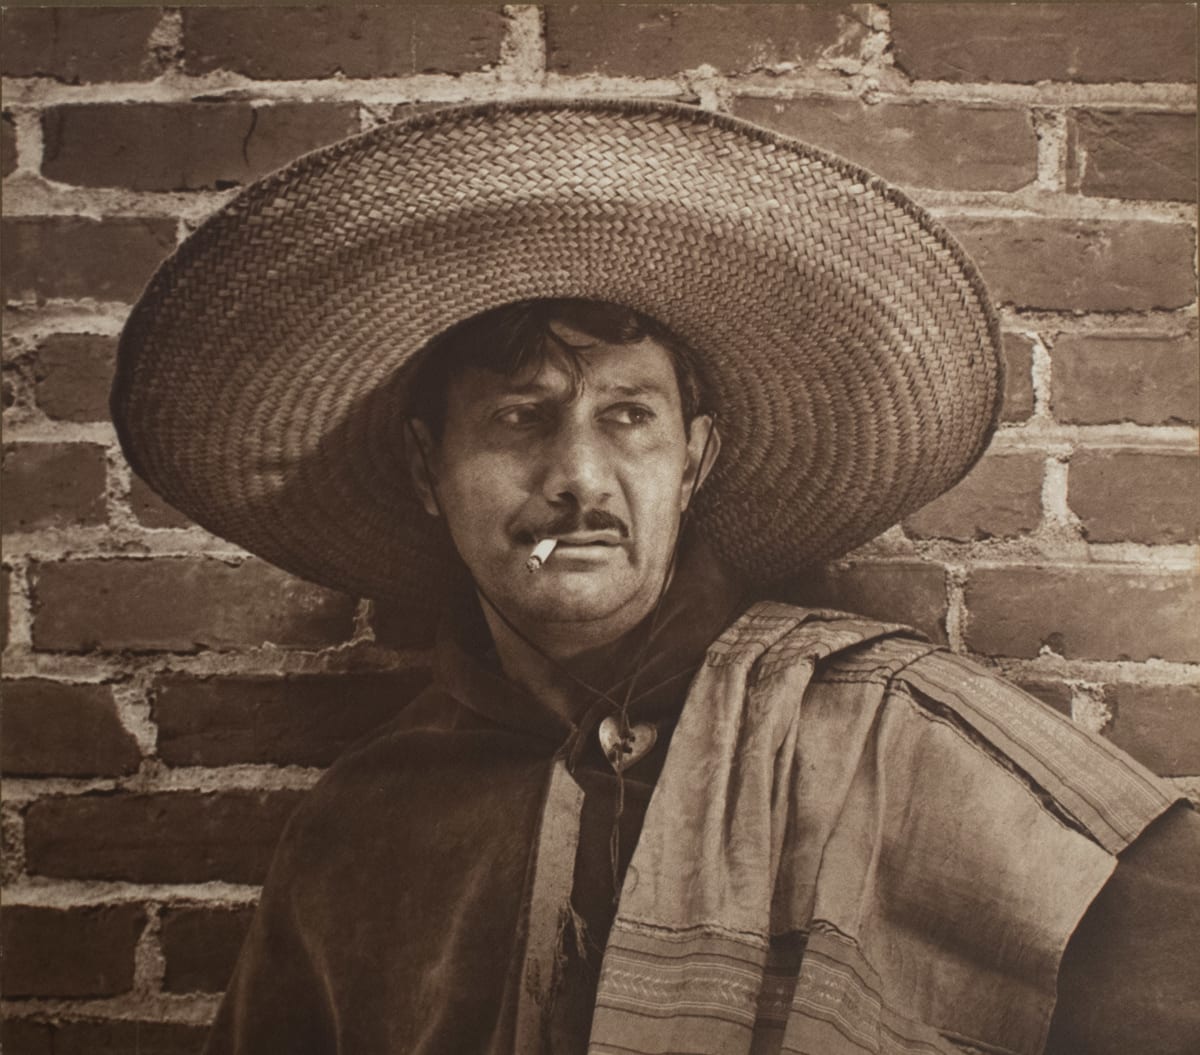 Peon by Shirley Hall  Image: A red-toned portrait of a Hispanic man who is leaning against a brick wall and smoking a cigarette. 